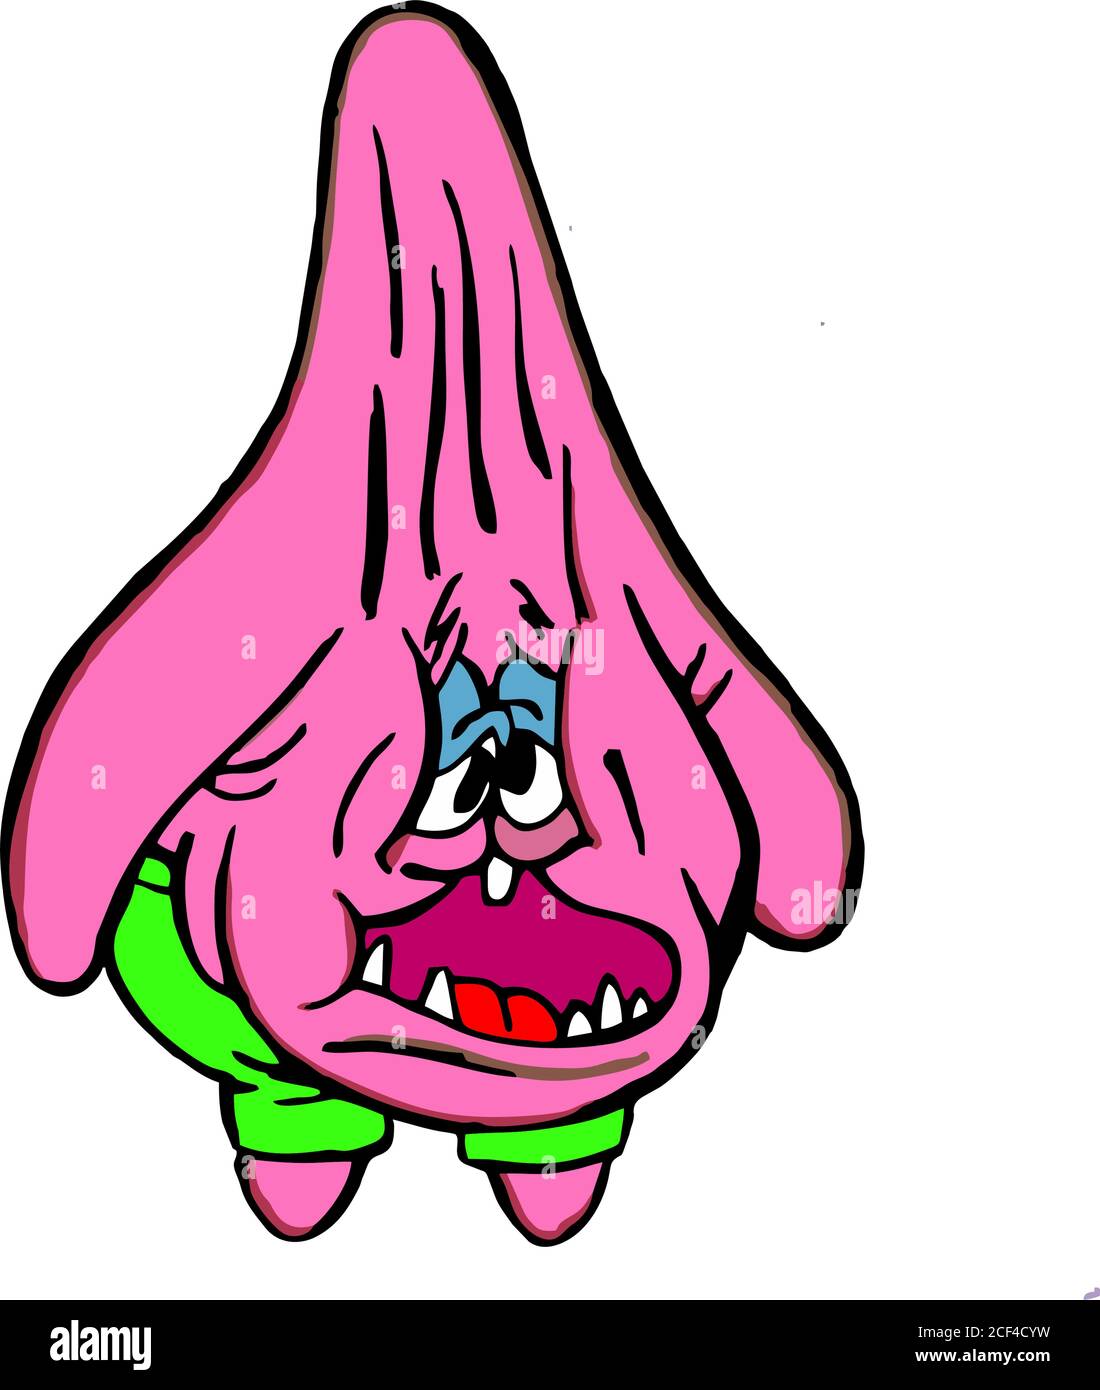 https://c8.alamy.com/comp/2CF4CYW/patrick-star-become-thin-and-hollow-cheeked-2CF4CYW.jpg